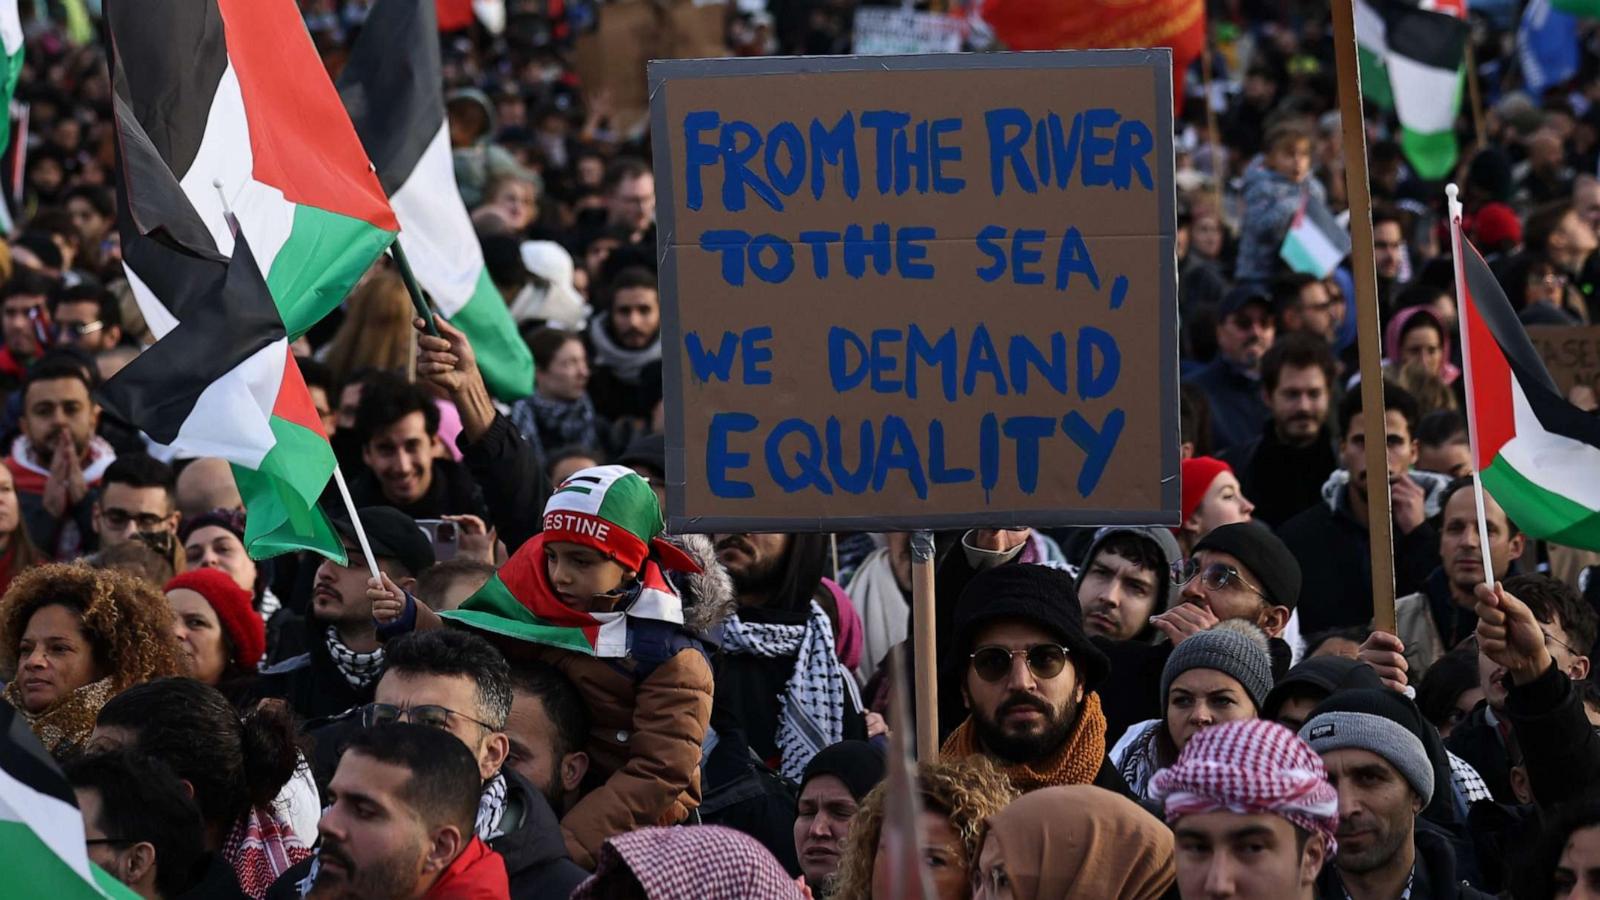 The real meaning of 'From the River to the Sea, Palestine will be